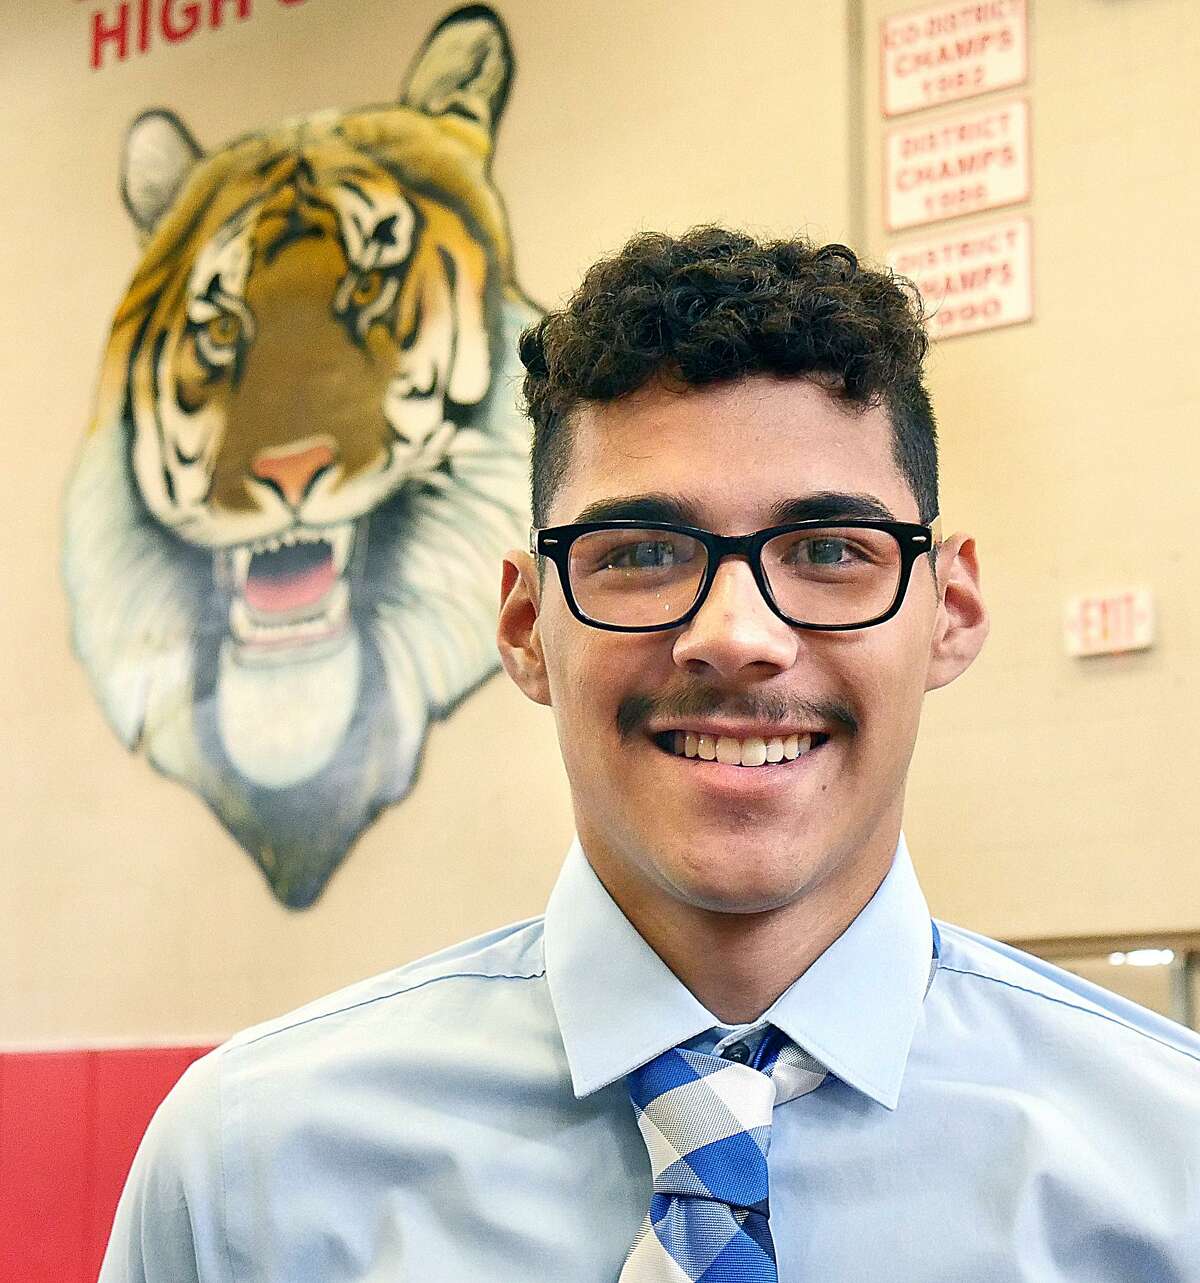 After setting the city record in the 800-meter run in his senior season, Martin’s Miguel Escamilla signed his National Letter of Intent to run track & field at UTRGV.